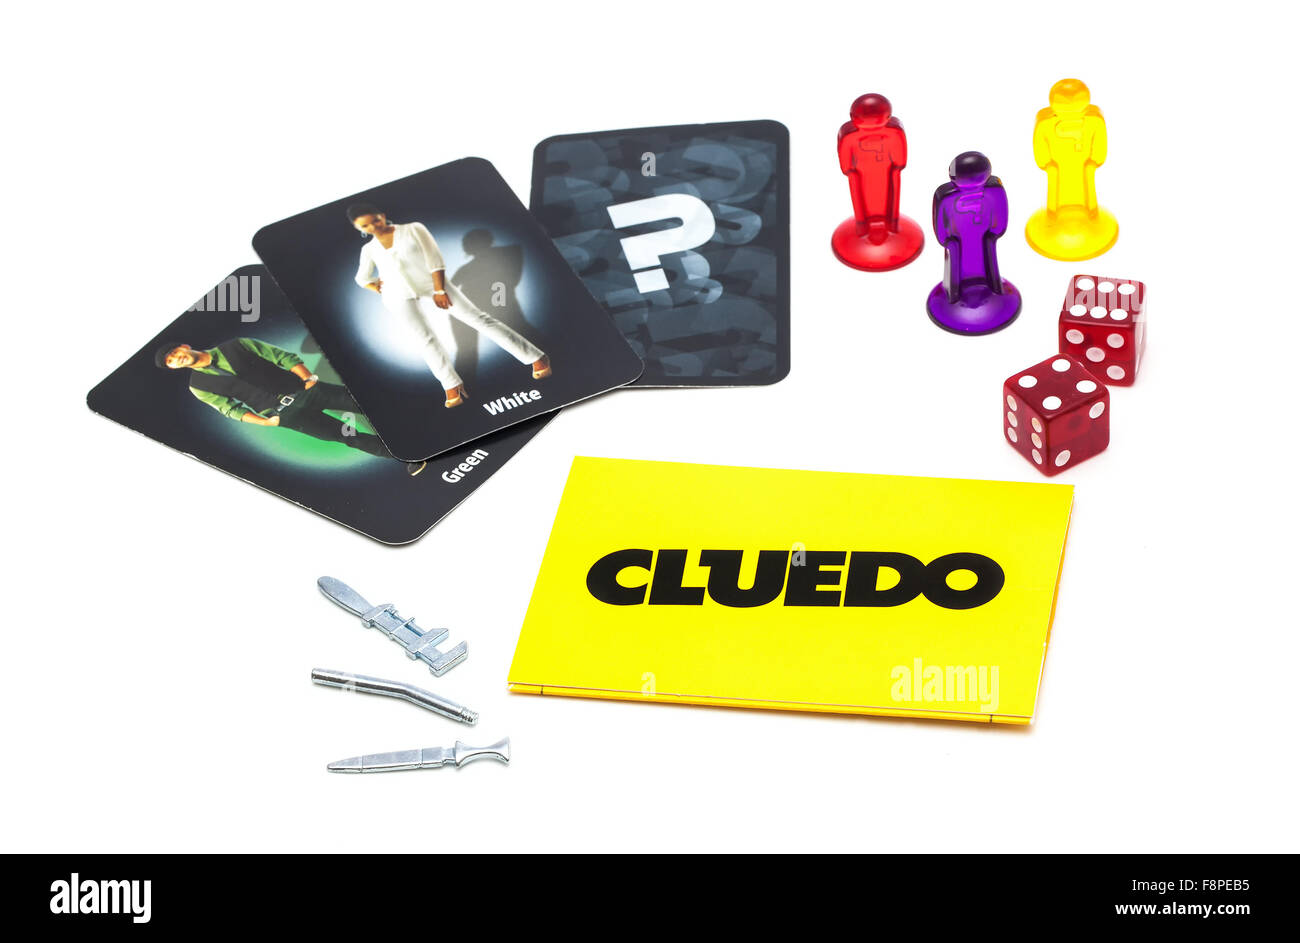 Cluedo Classic murder mystery game for three to six players on a White background Stock Photo